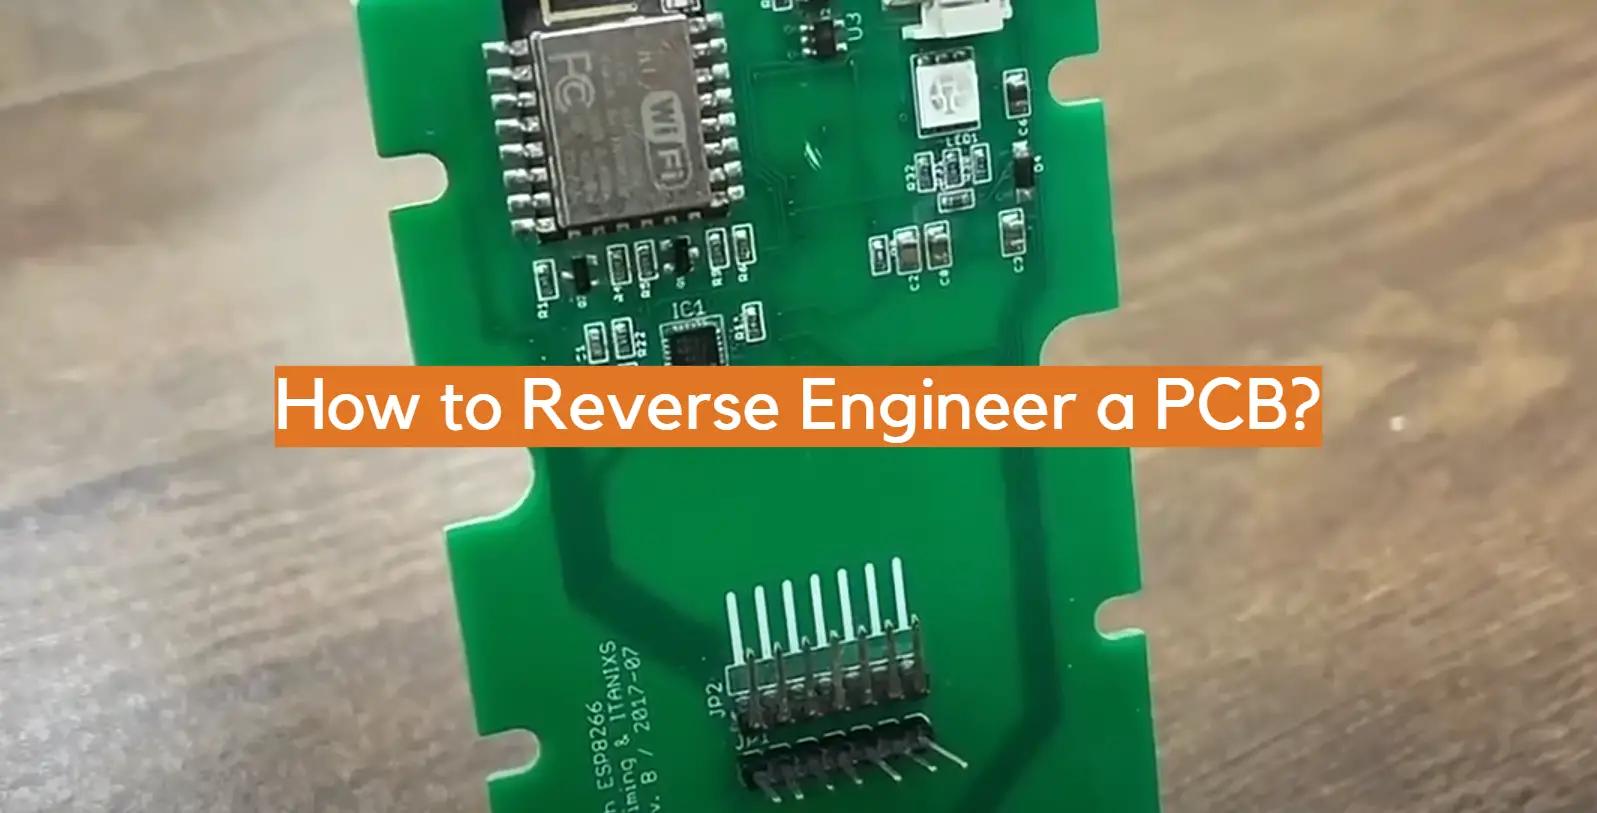 How to Reverse Engineer a PCB?